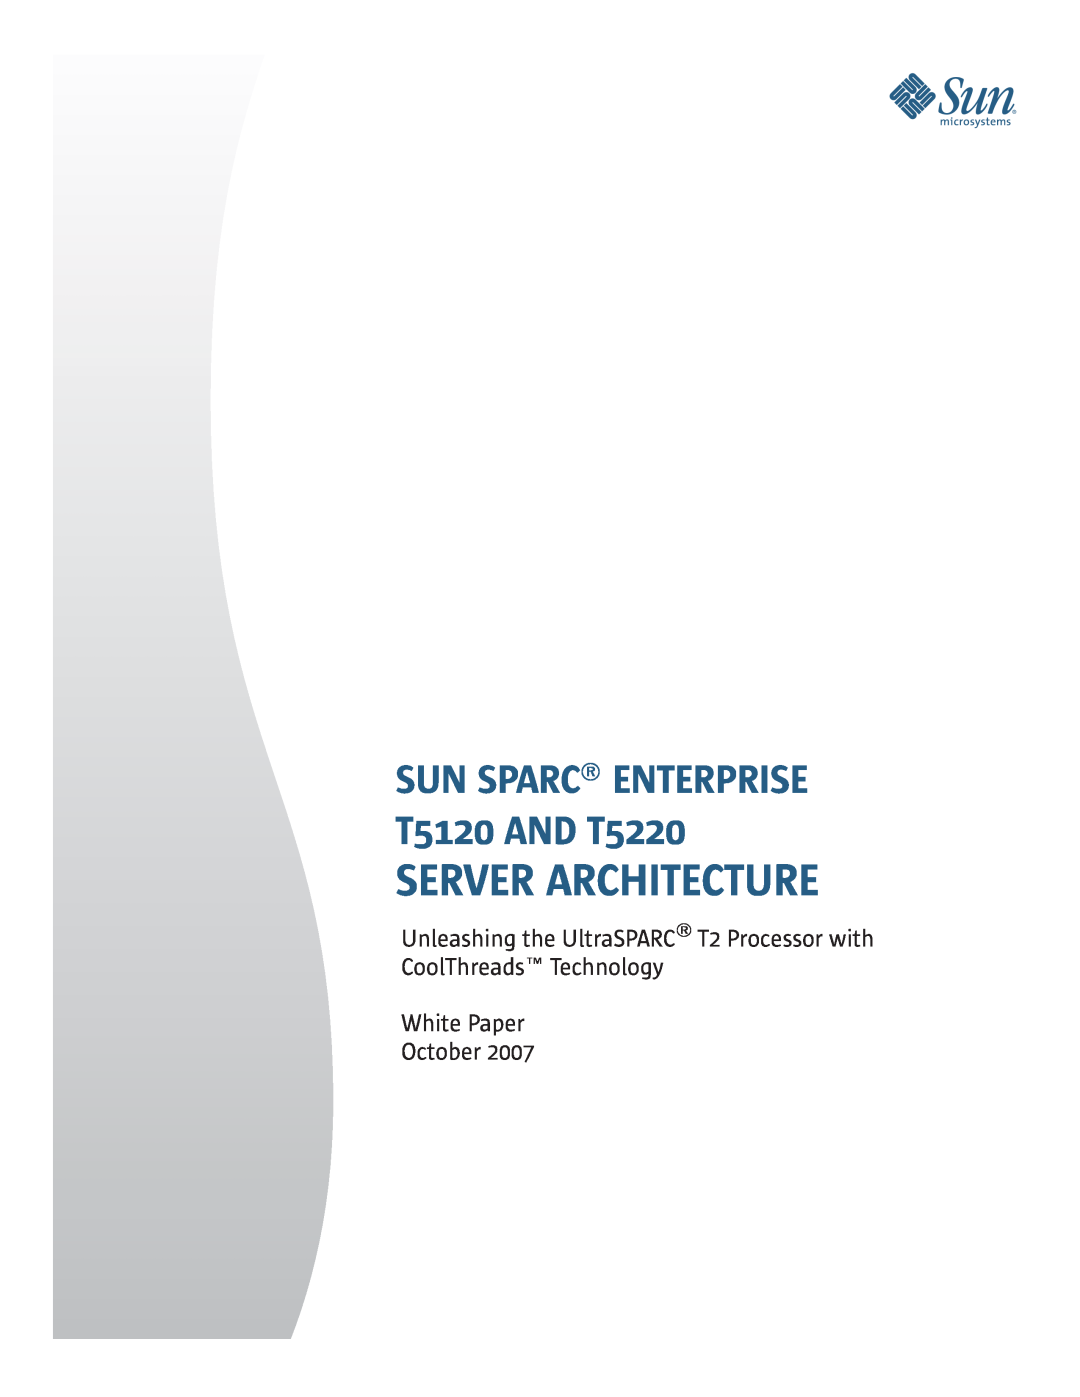 Sun Microsystems manual Server Architecture, SUN SPARC→ ENTERPRISE T5120 AND T5220, White Paper October 